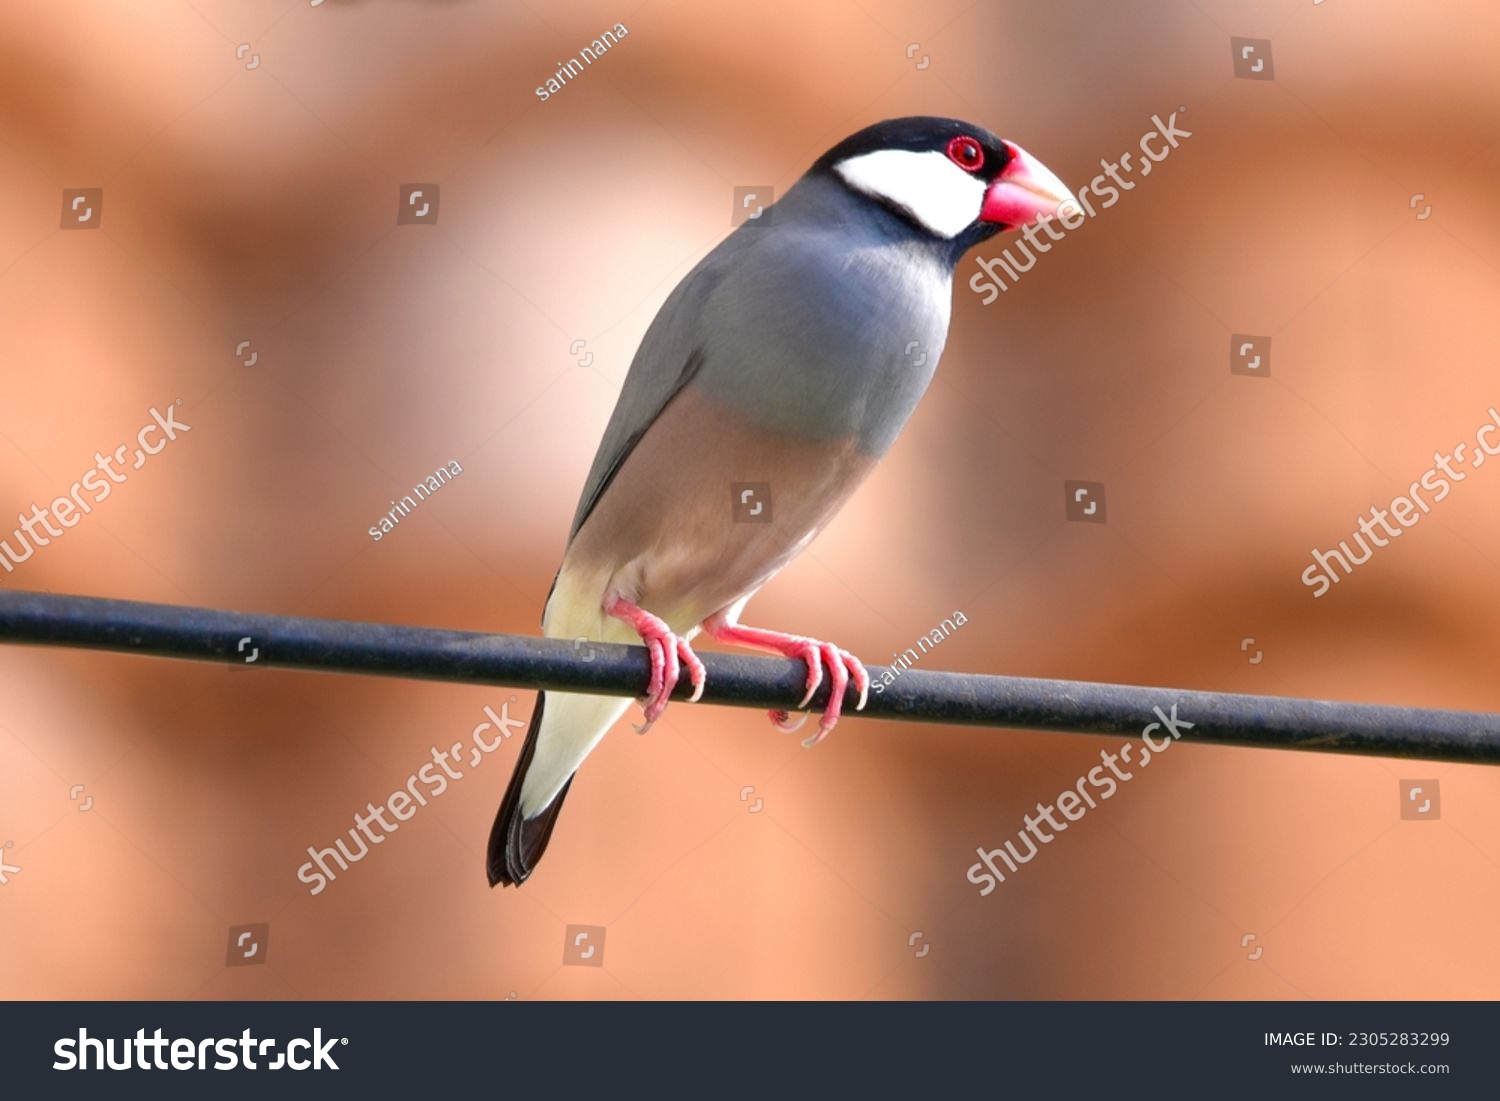 Sakura Java sparrow,Java sparrow, Java finch,Lonchura oryzivora(Estrildidae)
Lives in pairs or herds in grasslands, agricultural areas.and where people live Their food is grain,grass,fruit and insects #2305283299